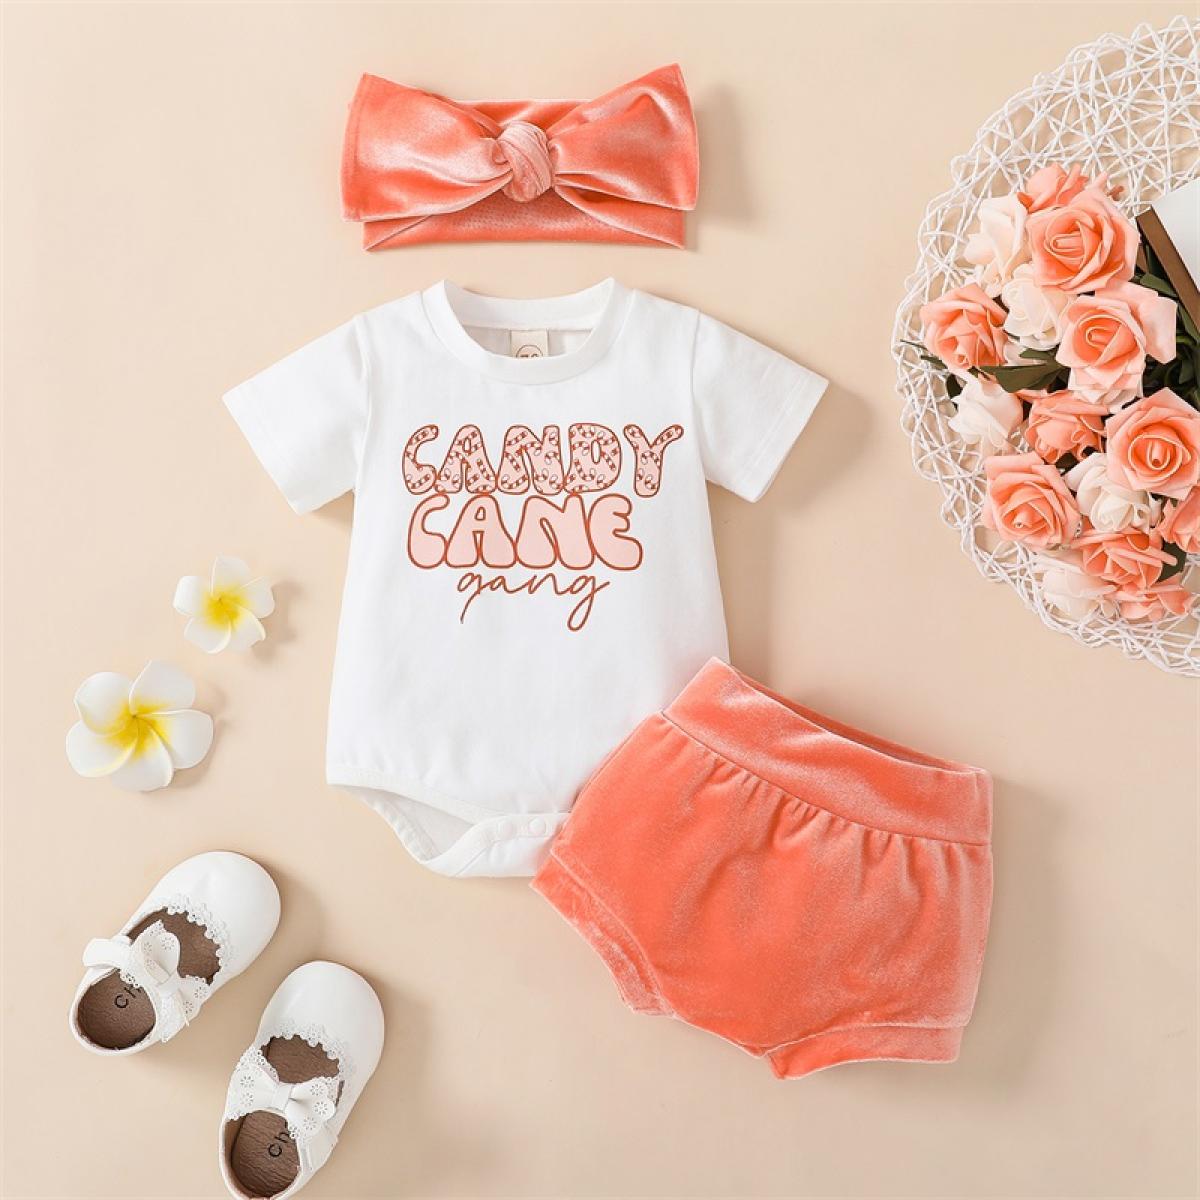 https://d3thqe68ymbqps.cloudfront.net/3495079-large_default/sunsiom-kid-girl-clothes-suit-short-sleeve-round-neck-letters-romper-t.jpg